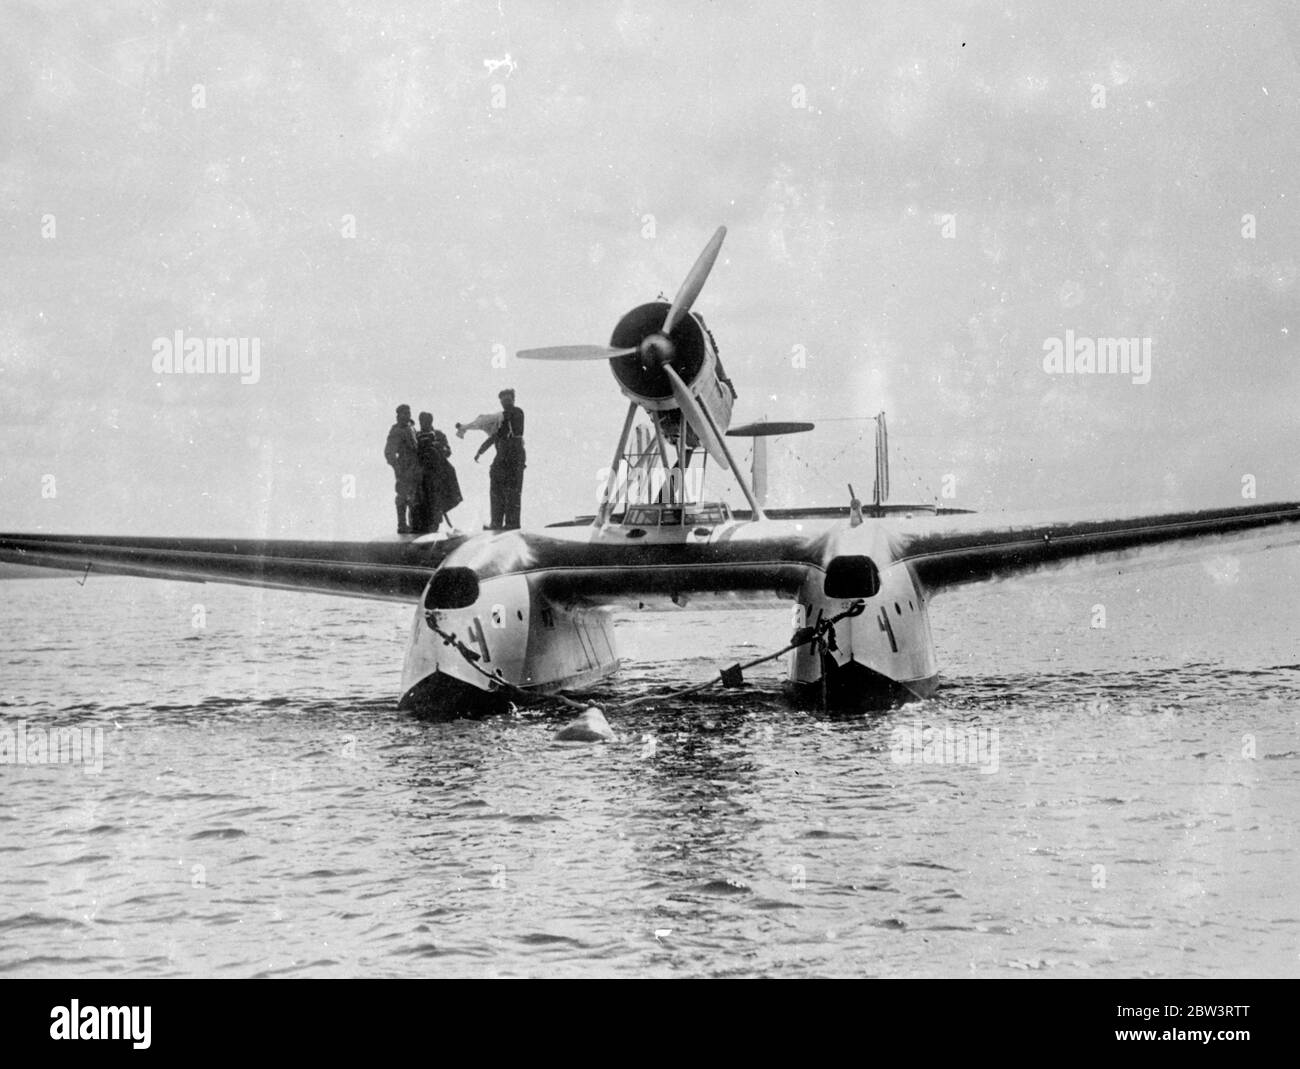 The Italian Air Marshall Italo Balbo became famous for organizing a squadron of S.55s for Atlantic crossings, culminating in his 1933 flight From 1 July - 12 August 1933 , The Italian Air Marshall Italo Balbo led a flight of 24 Savoia-Marchetti S.55 flying boats on a round-trip flight from Rome to the Century of Progress International Exposition in Chicago, Illinois. The flight had seven legs : Orbetello - Amsterdam - Derry - Reykjavík - Cartwright, Labrador - Shediac - Montreal ending on Lake Michigan near Burnham Park. It was his second Atlantic crossings . Photo shows : The Italian Air Mars Stock Photo